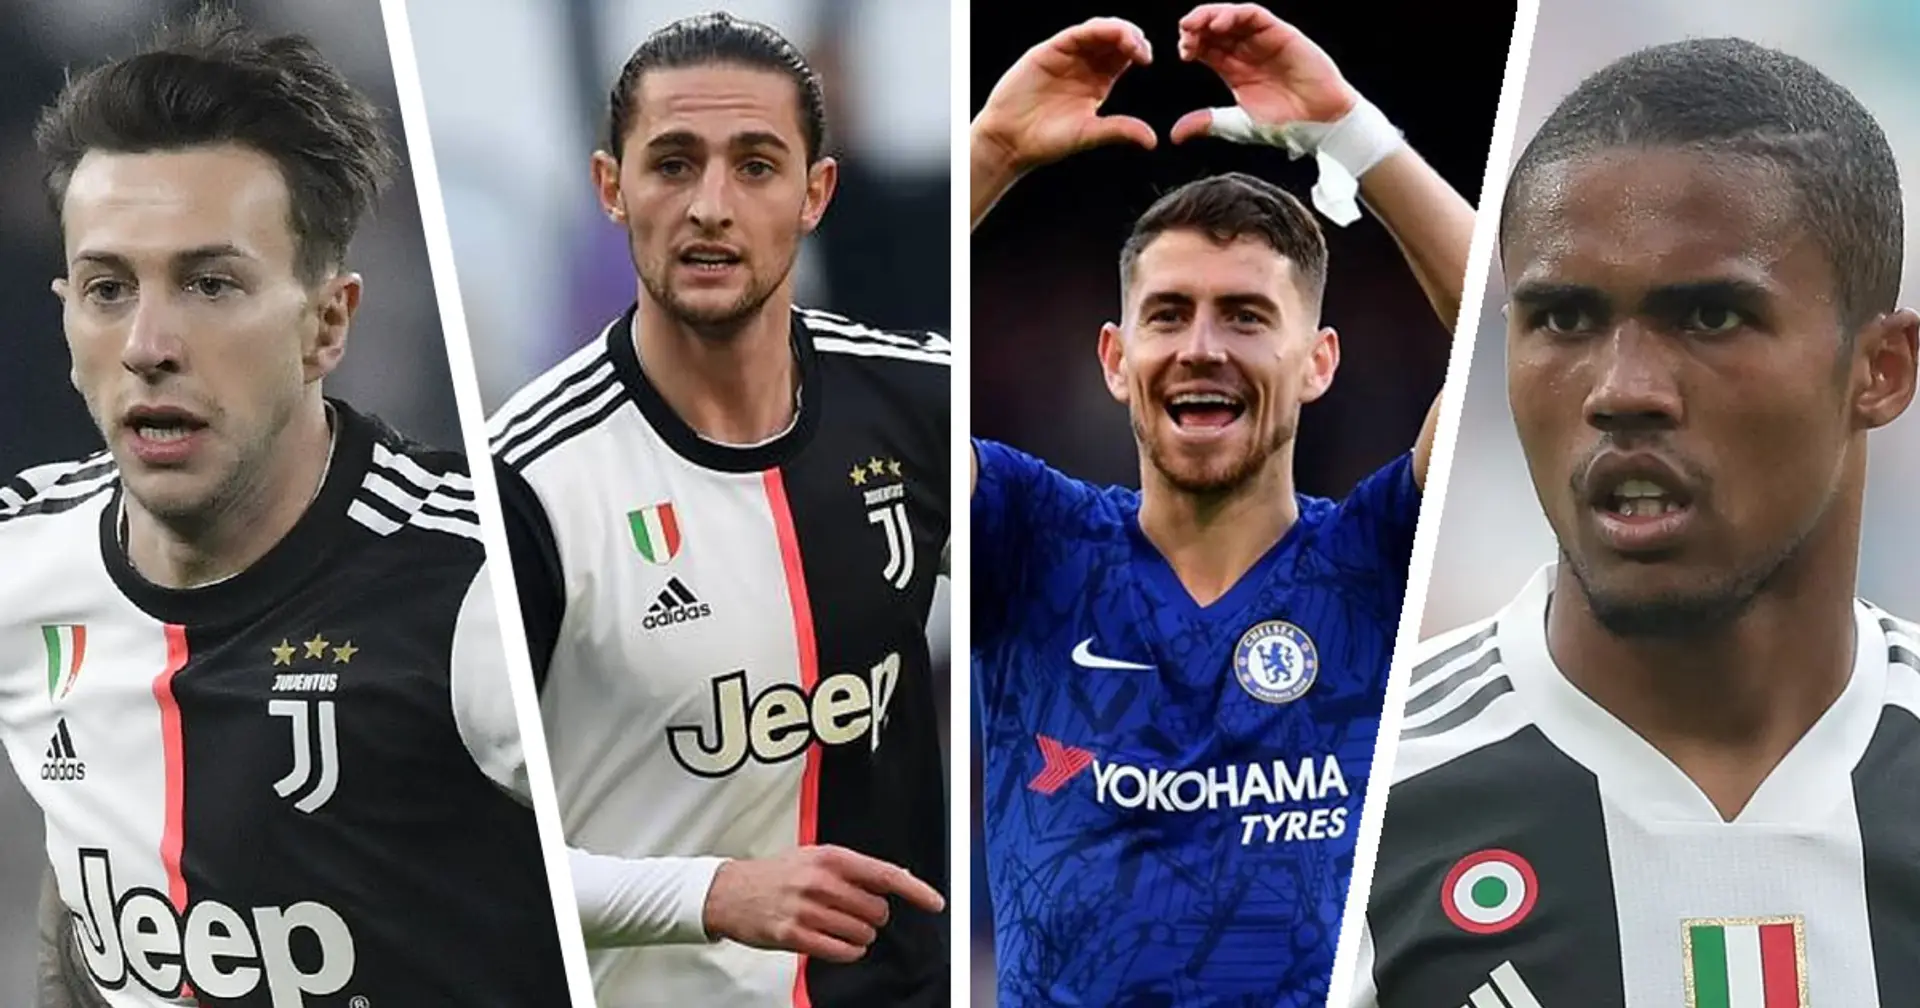 Chelsea offered 'a pick of three players' by Juventus in exchange for vice-captain Jorginho as Pjanic turns down Stamford Bridge move